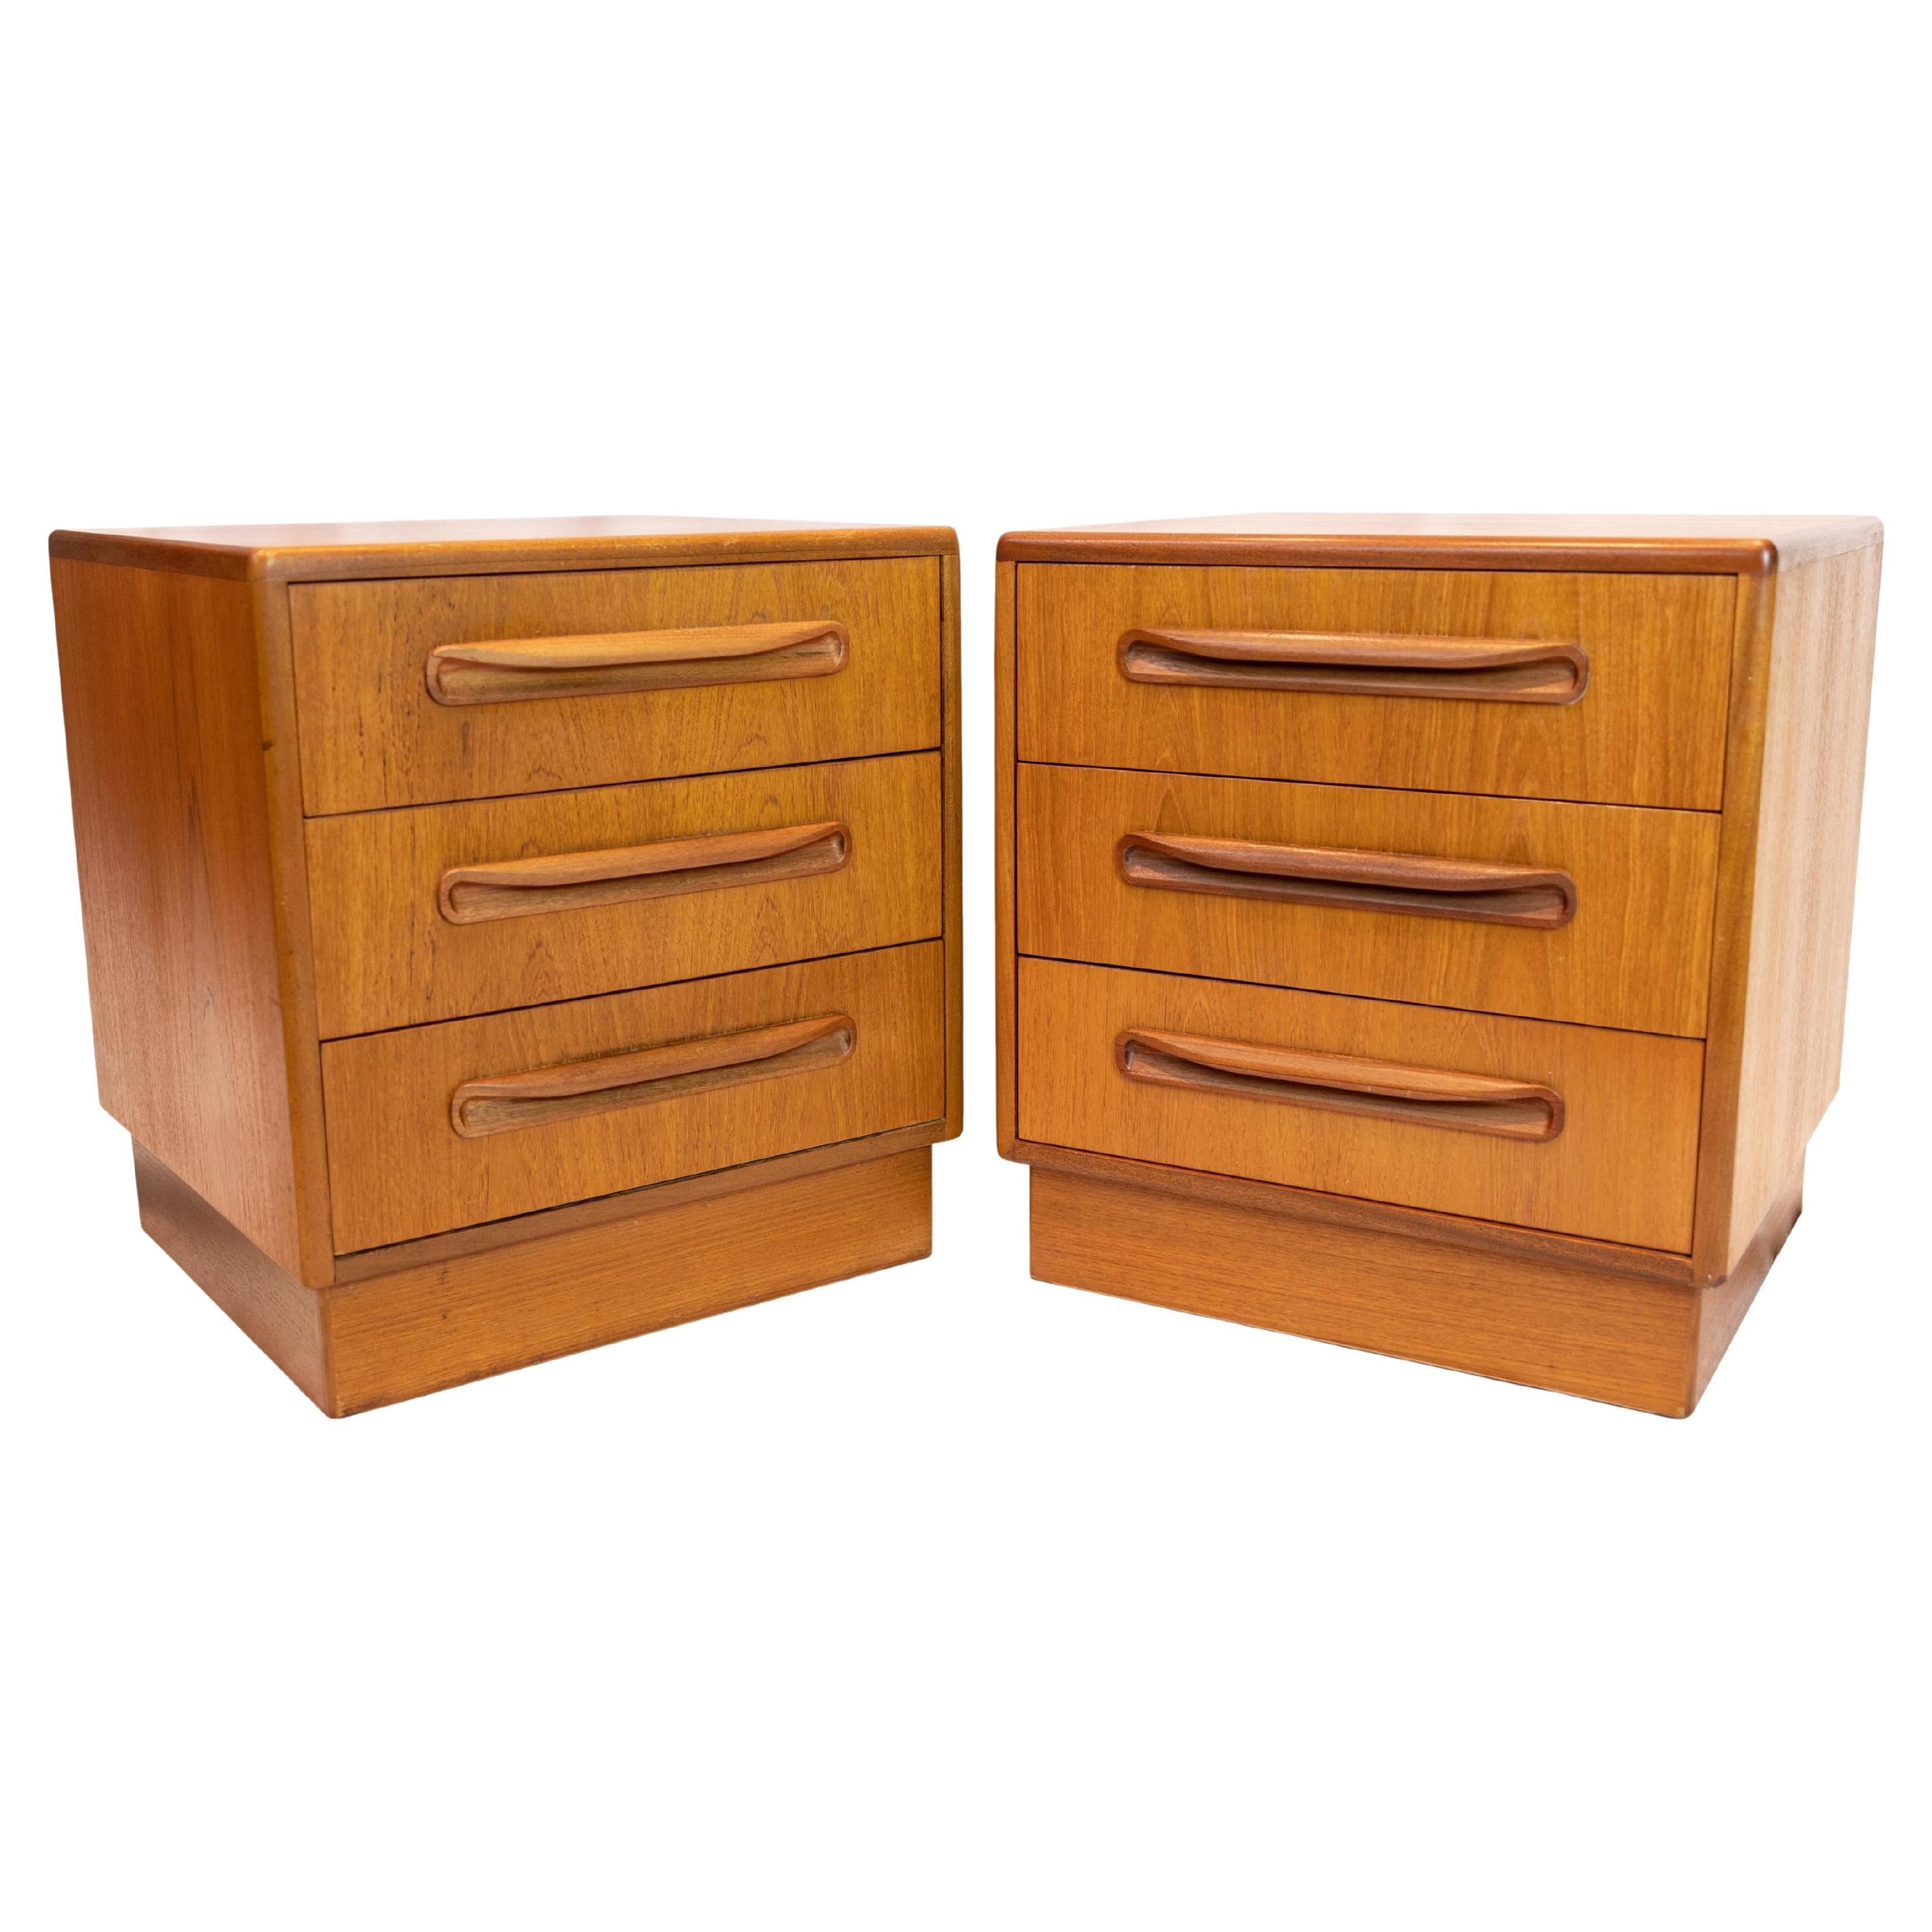 Pair of G Plan Teak 'Fresco' Side Chests by Victor Wilkins, English, ca. 1960